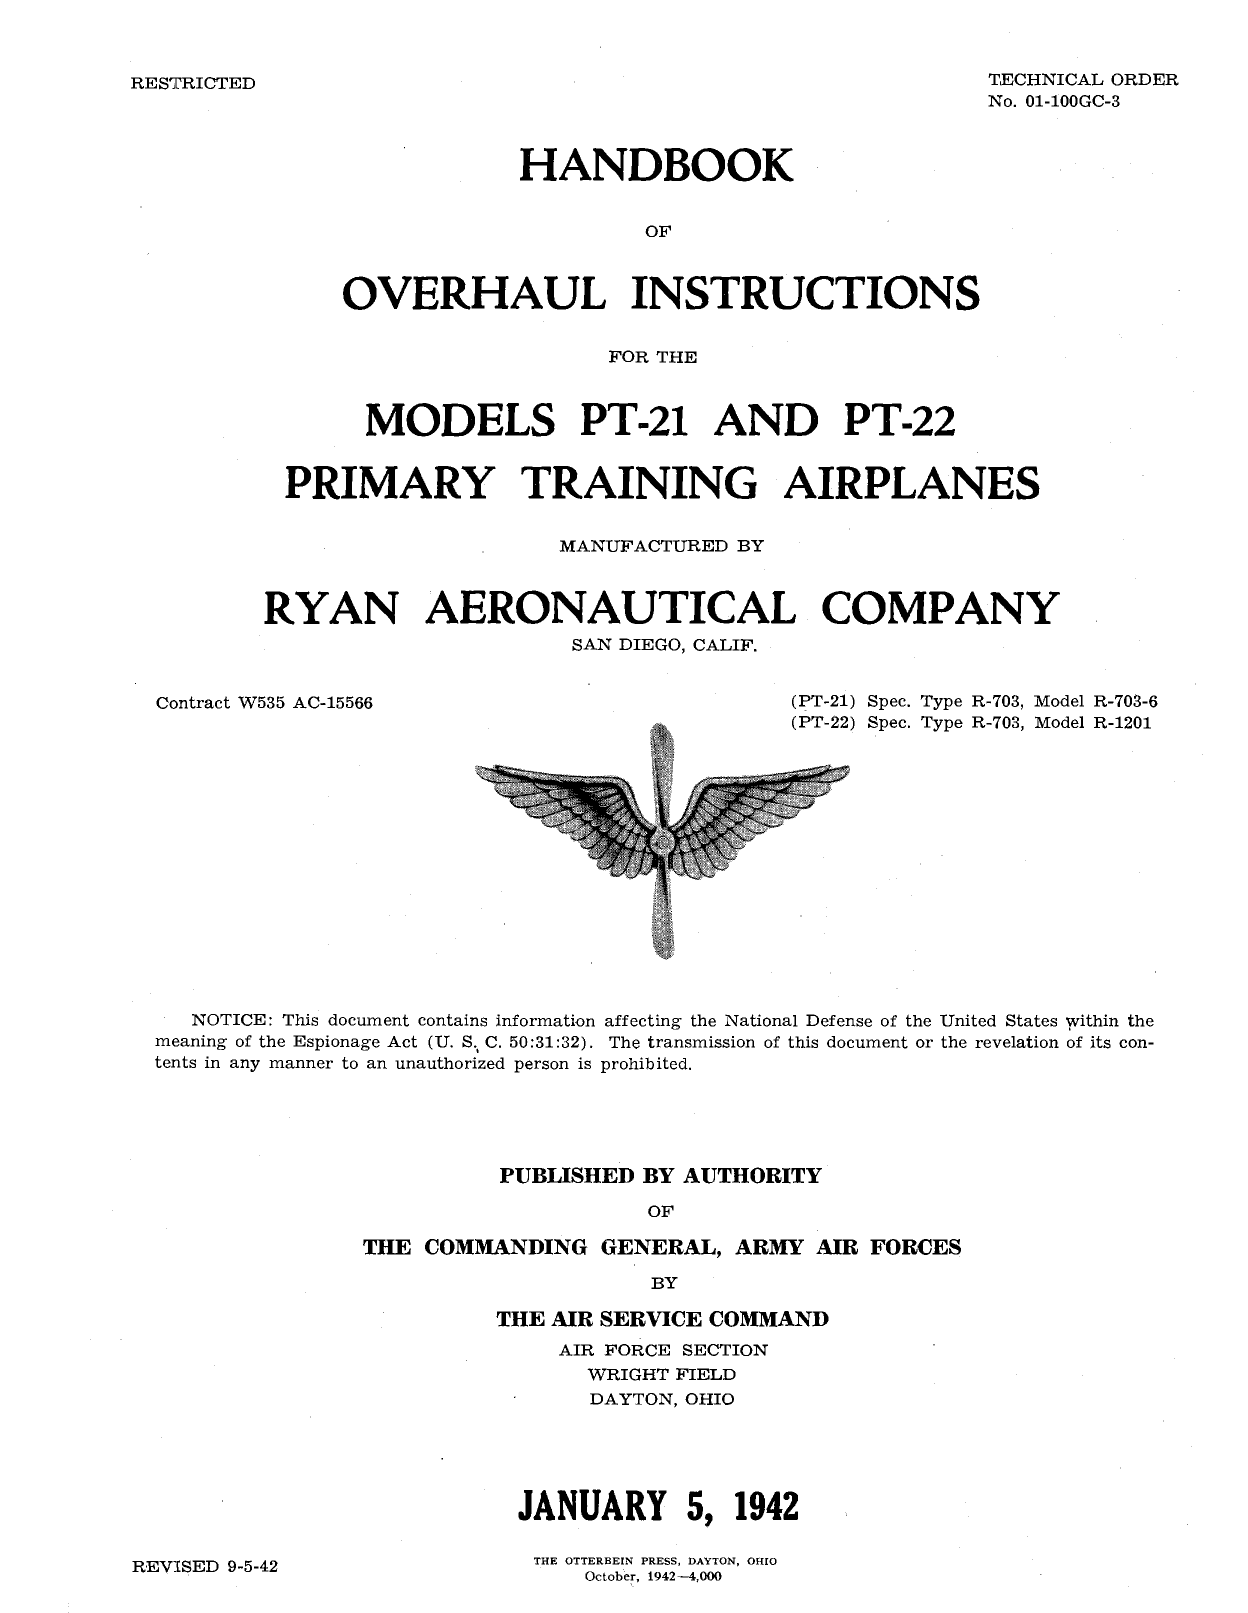 Sample page 1 from AirCorps Library document: Overhaul Instructions for Models PT-21 and PT-22 Primary Training Airplanes